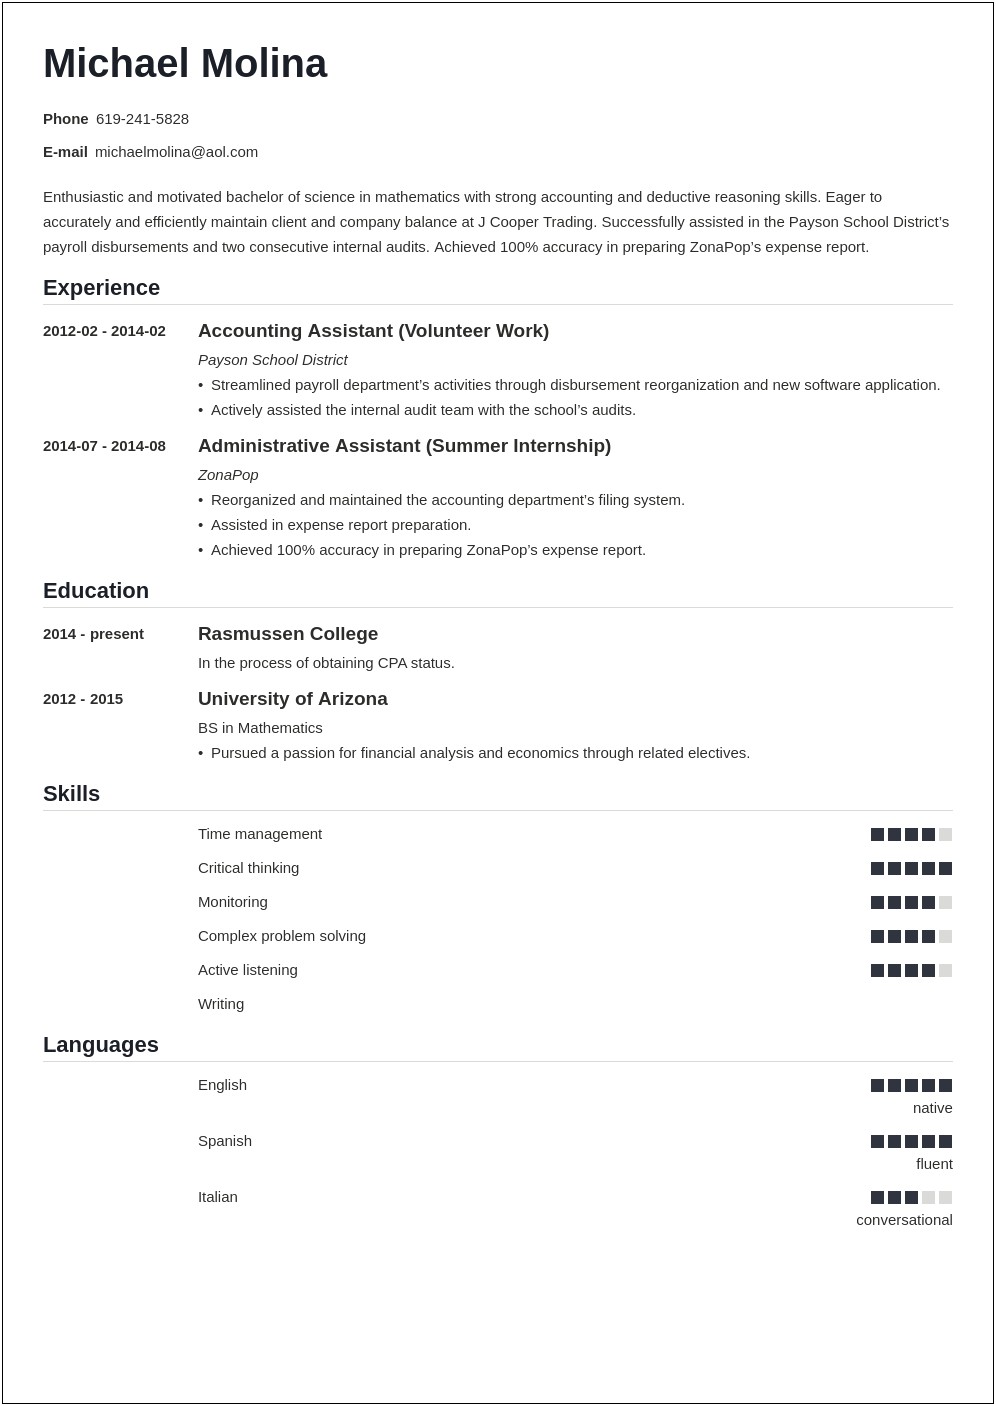 Professional Summary Resume Sample For Accountant